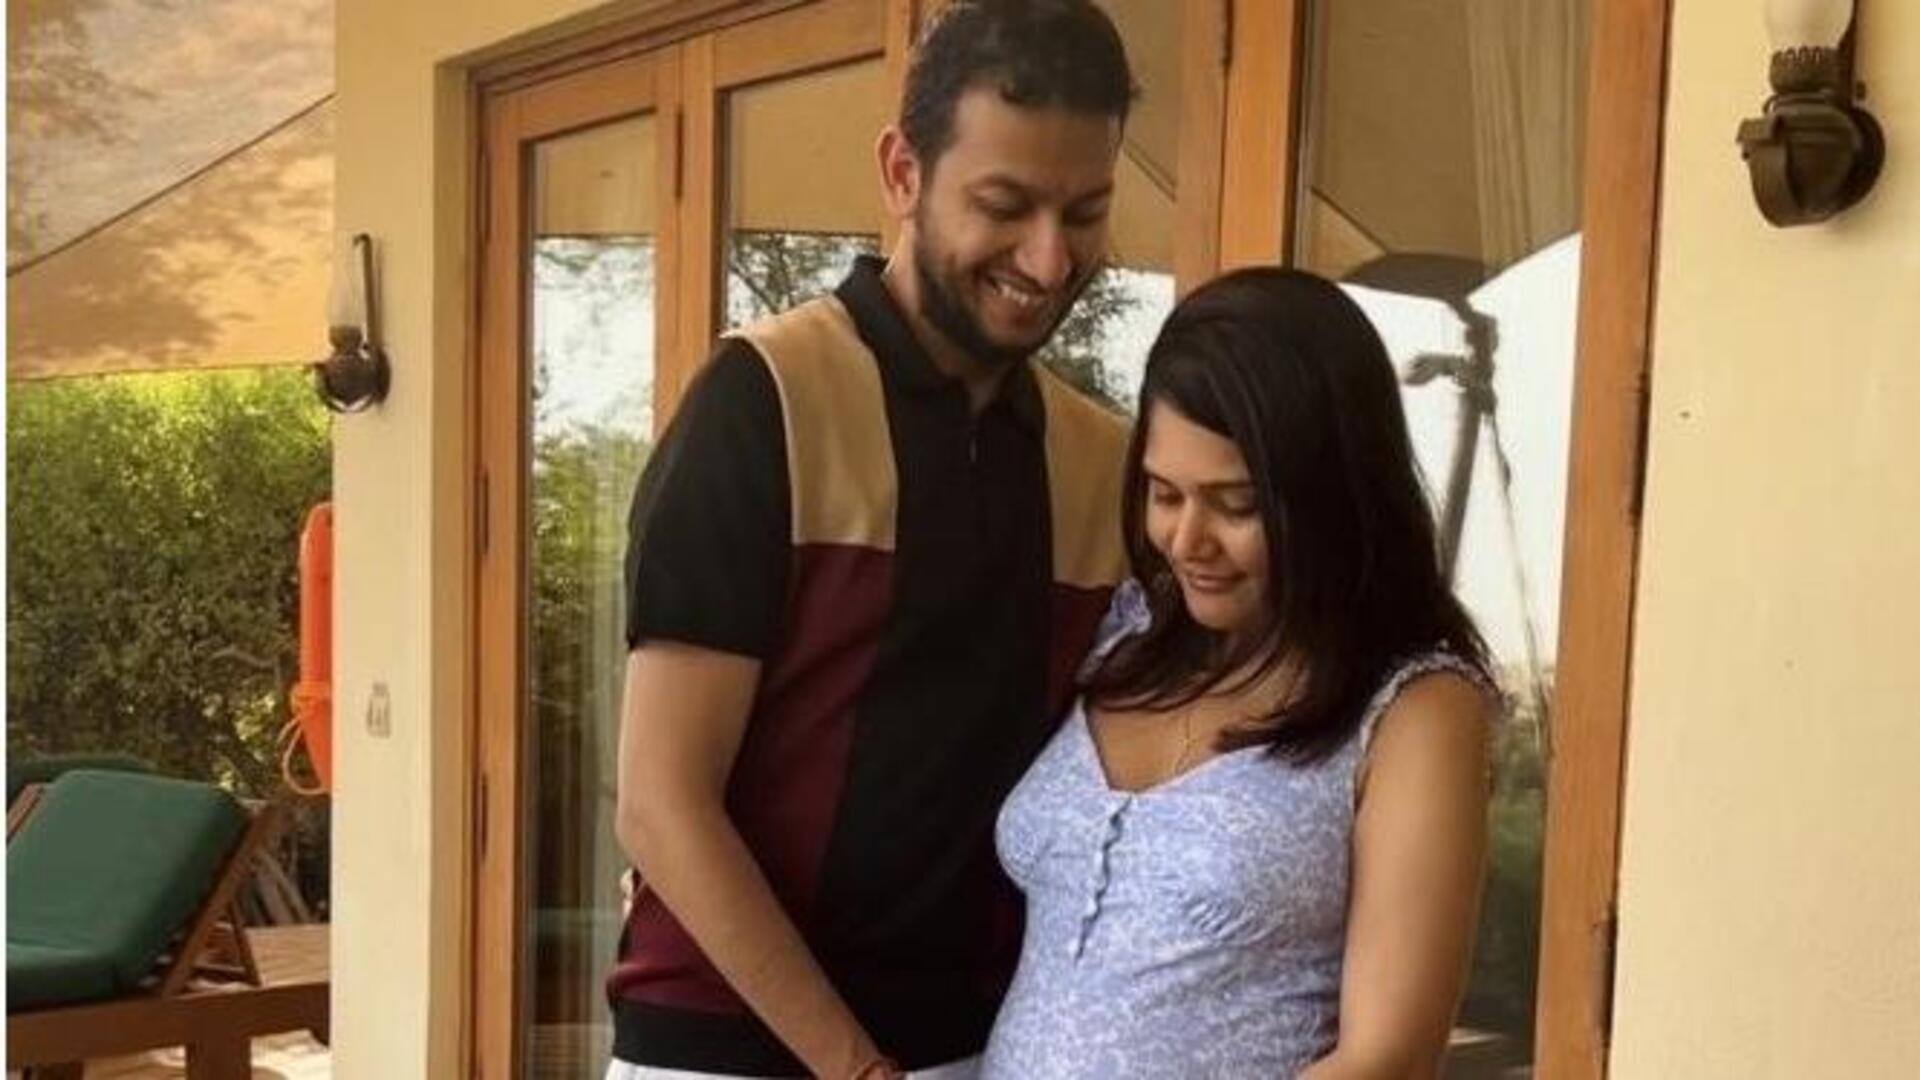 OYO founder Ritesh Agarwal is going to be a father!